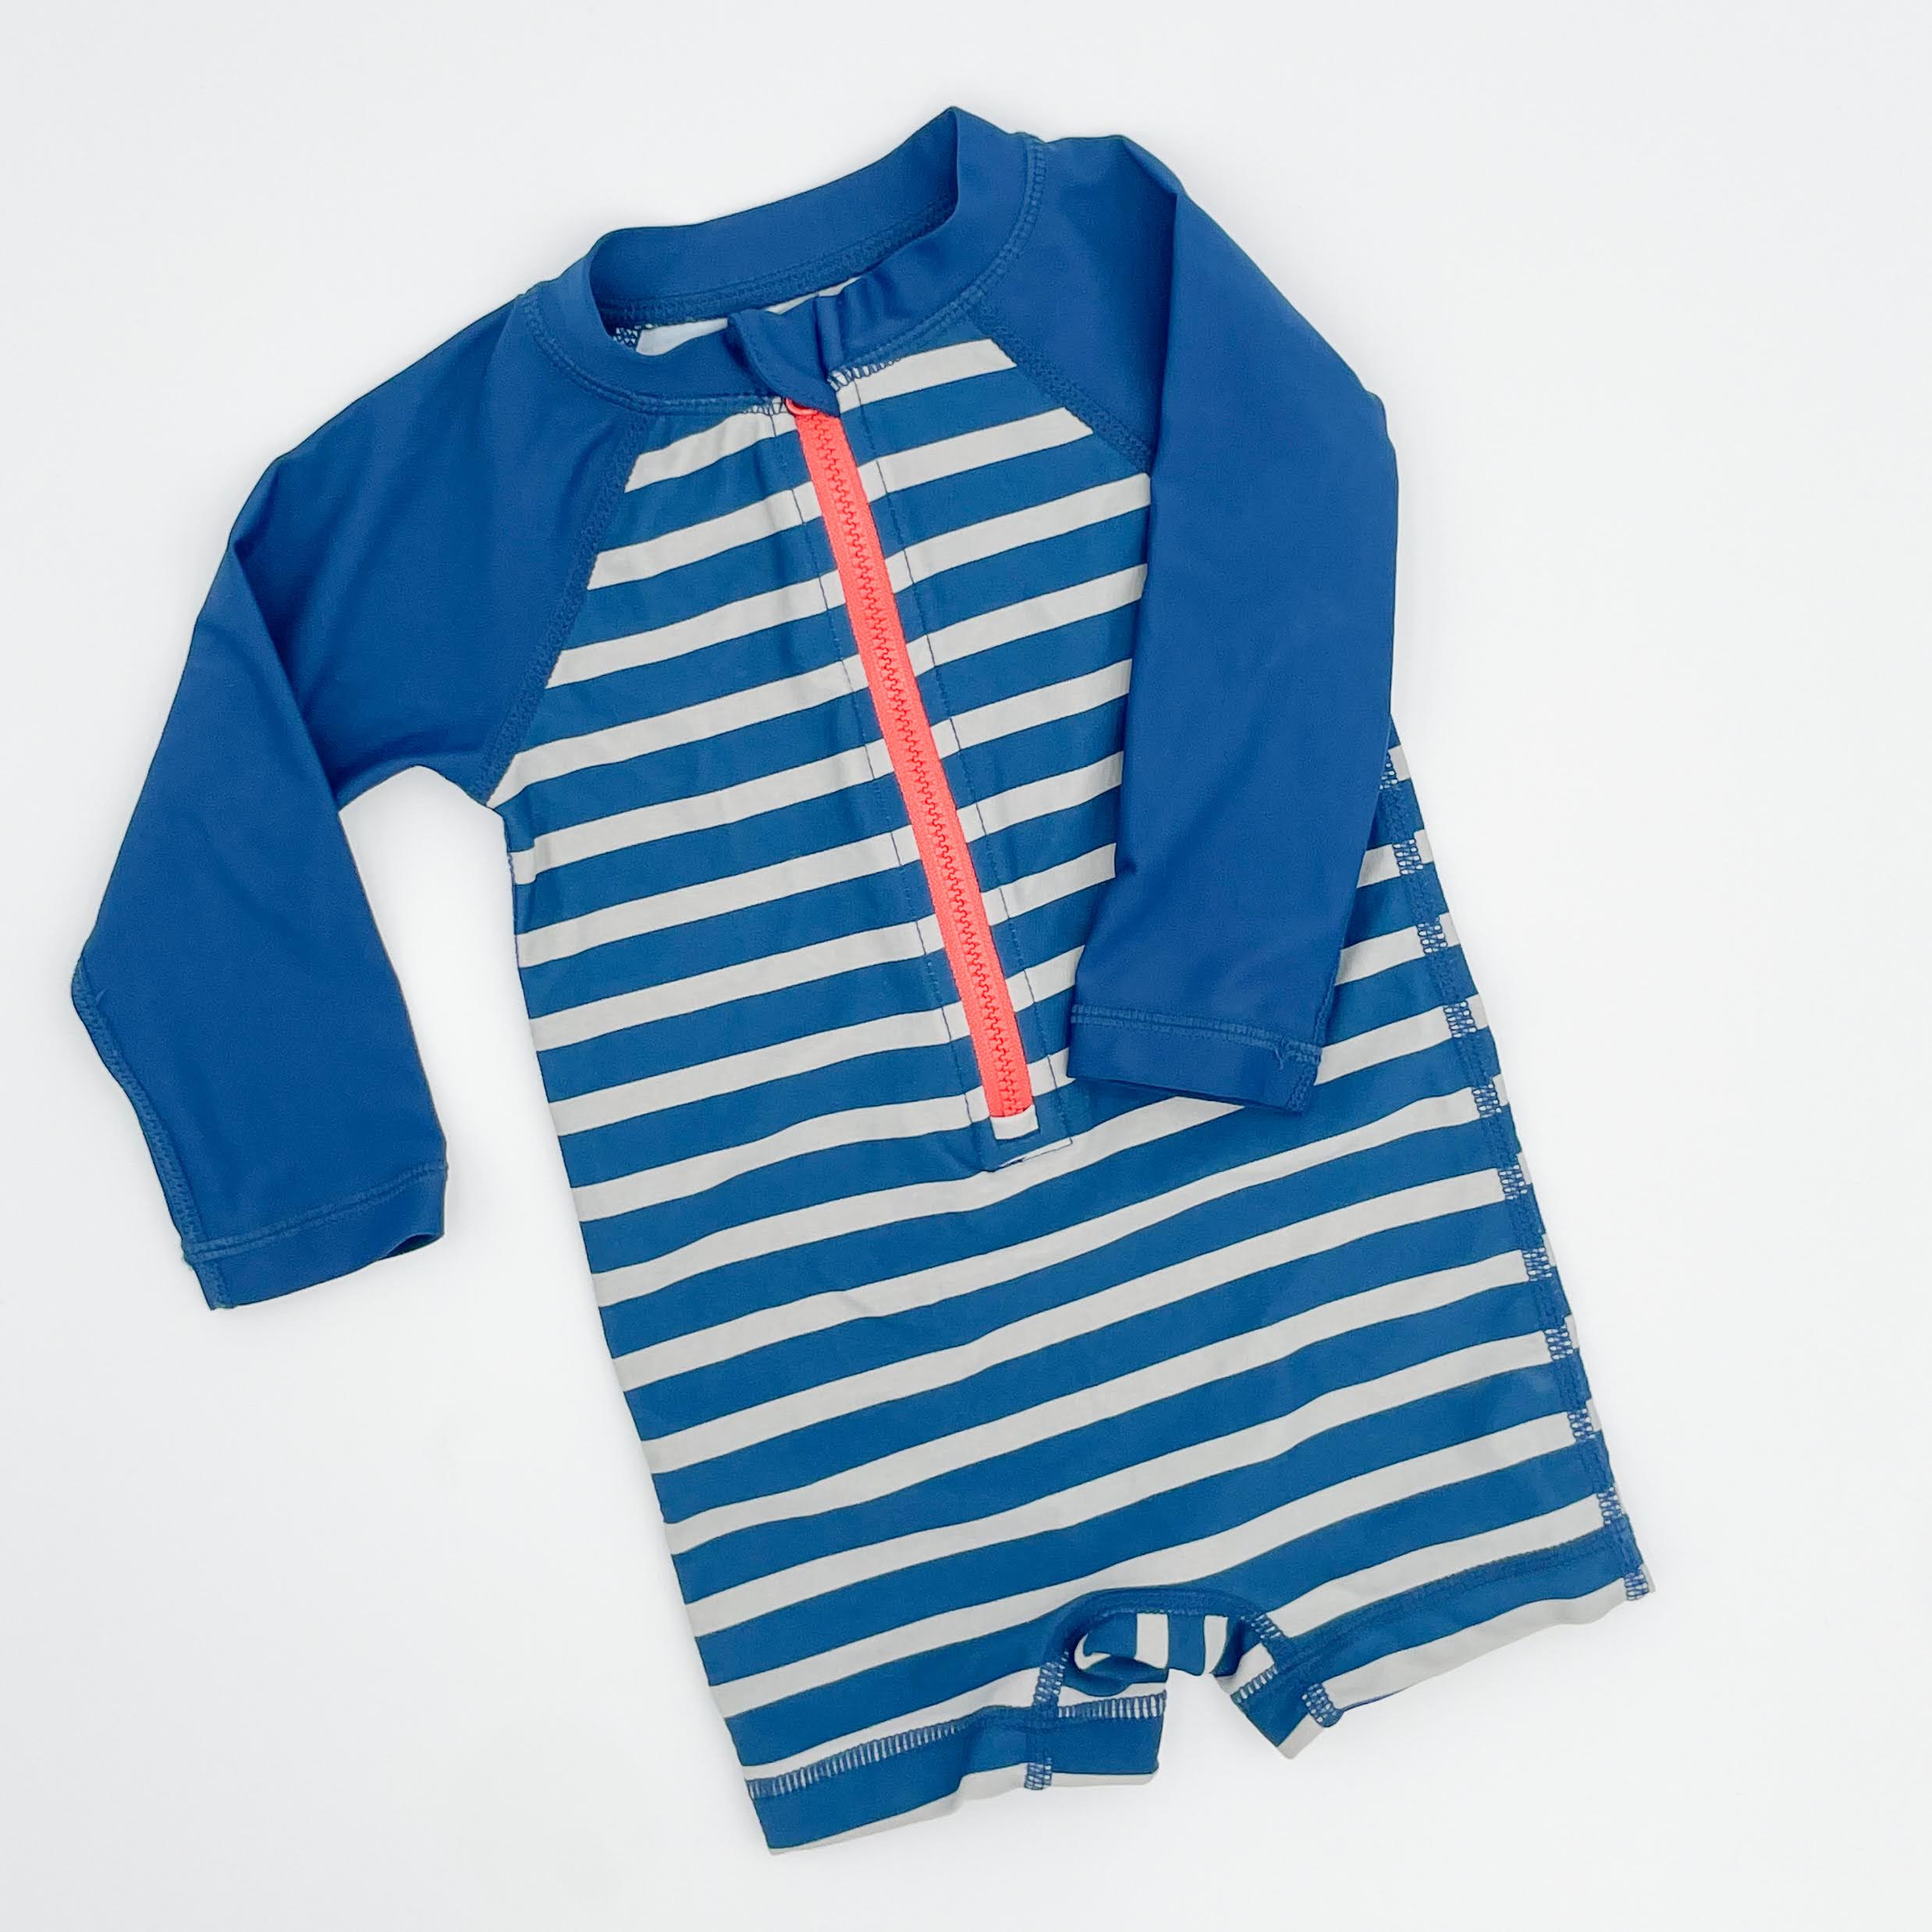 One Piece Striped - Tea Collection